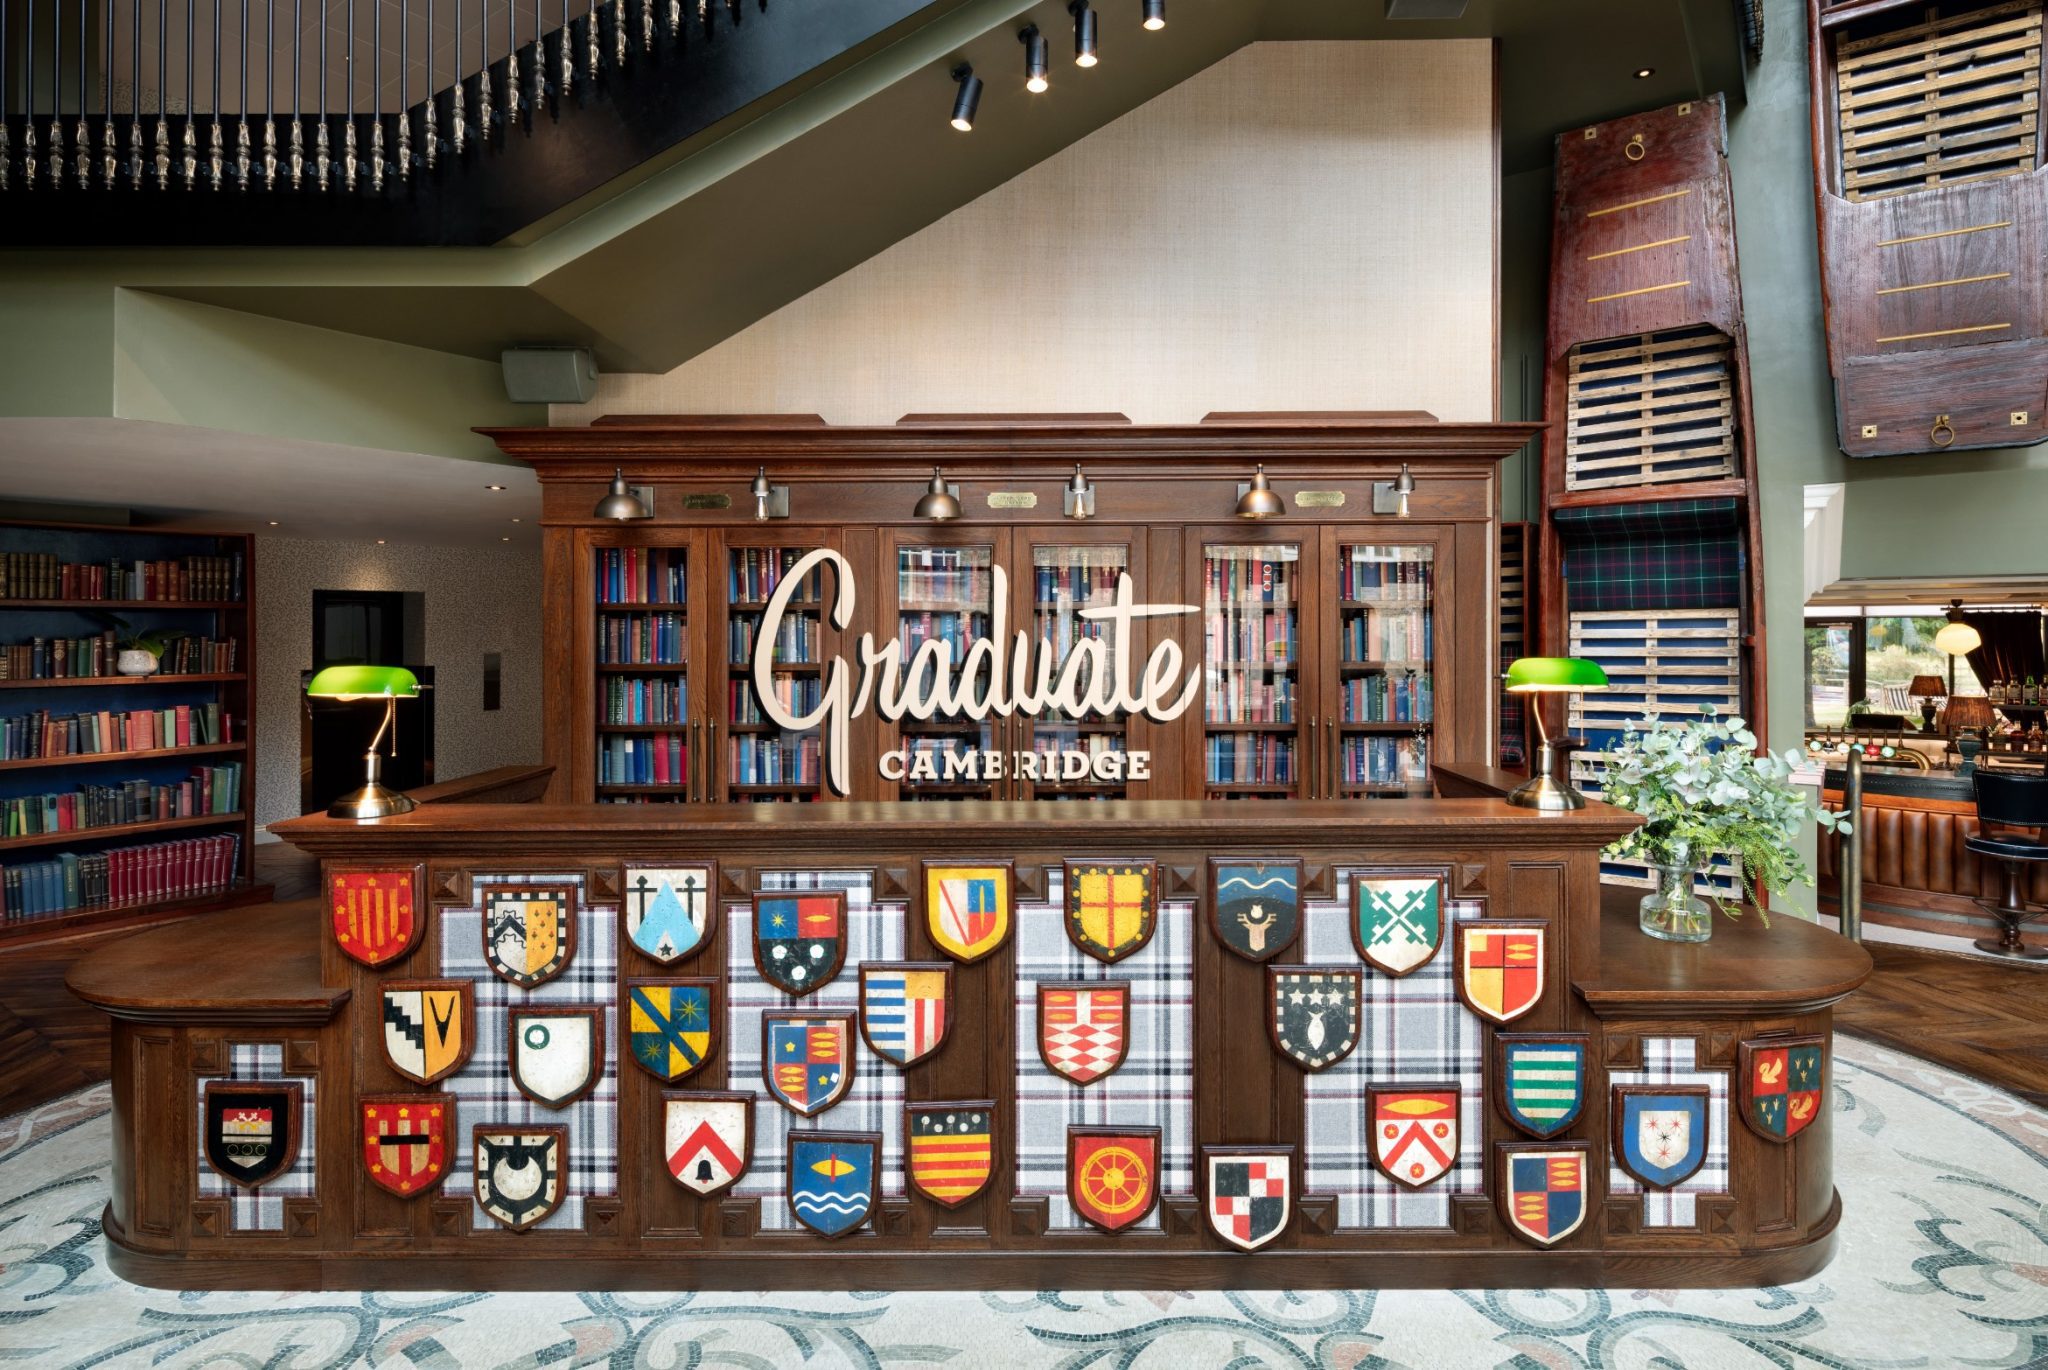 A desk with shields in front and a sign above that says 'Graduate Cambridge'